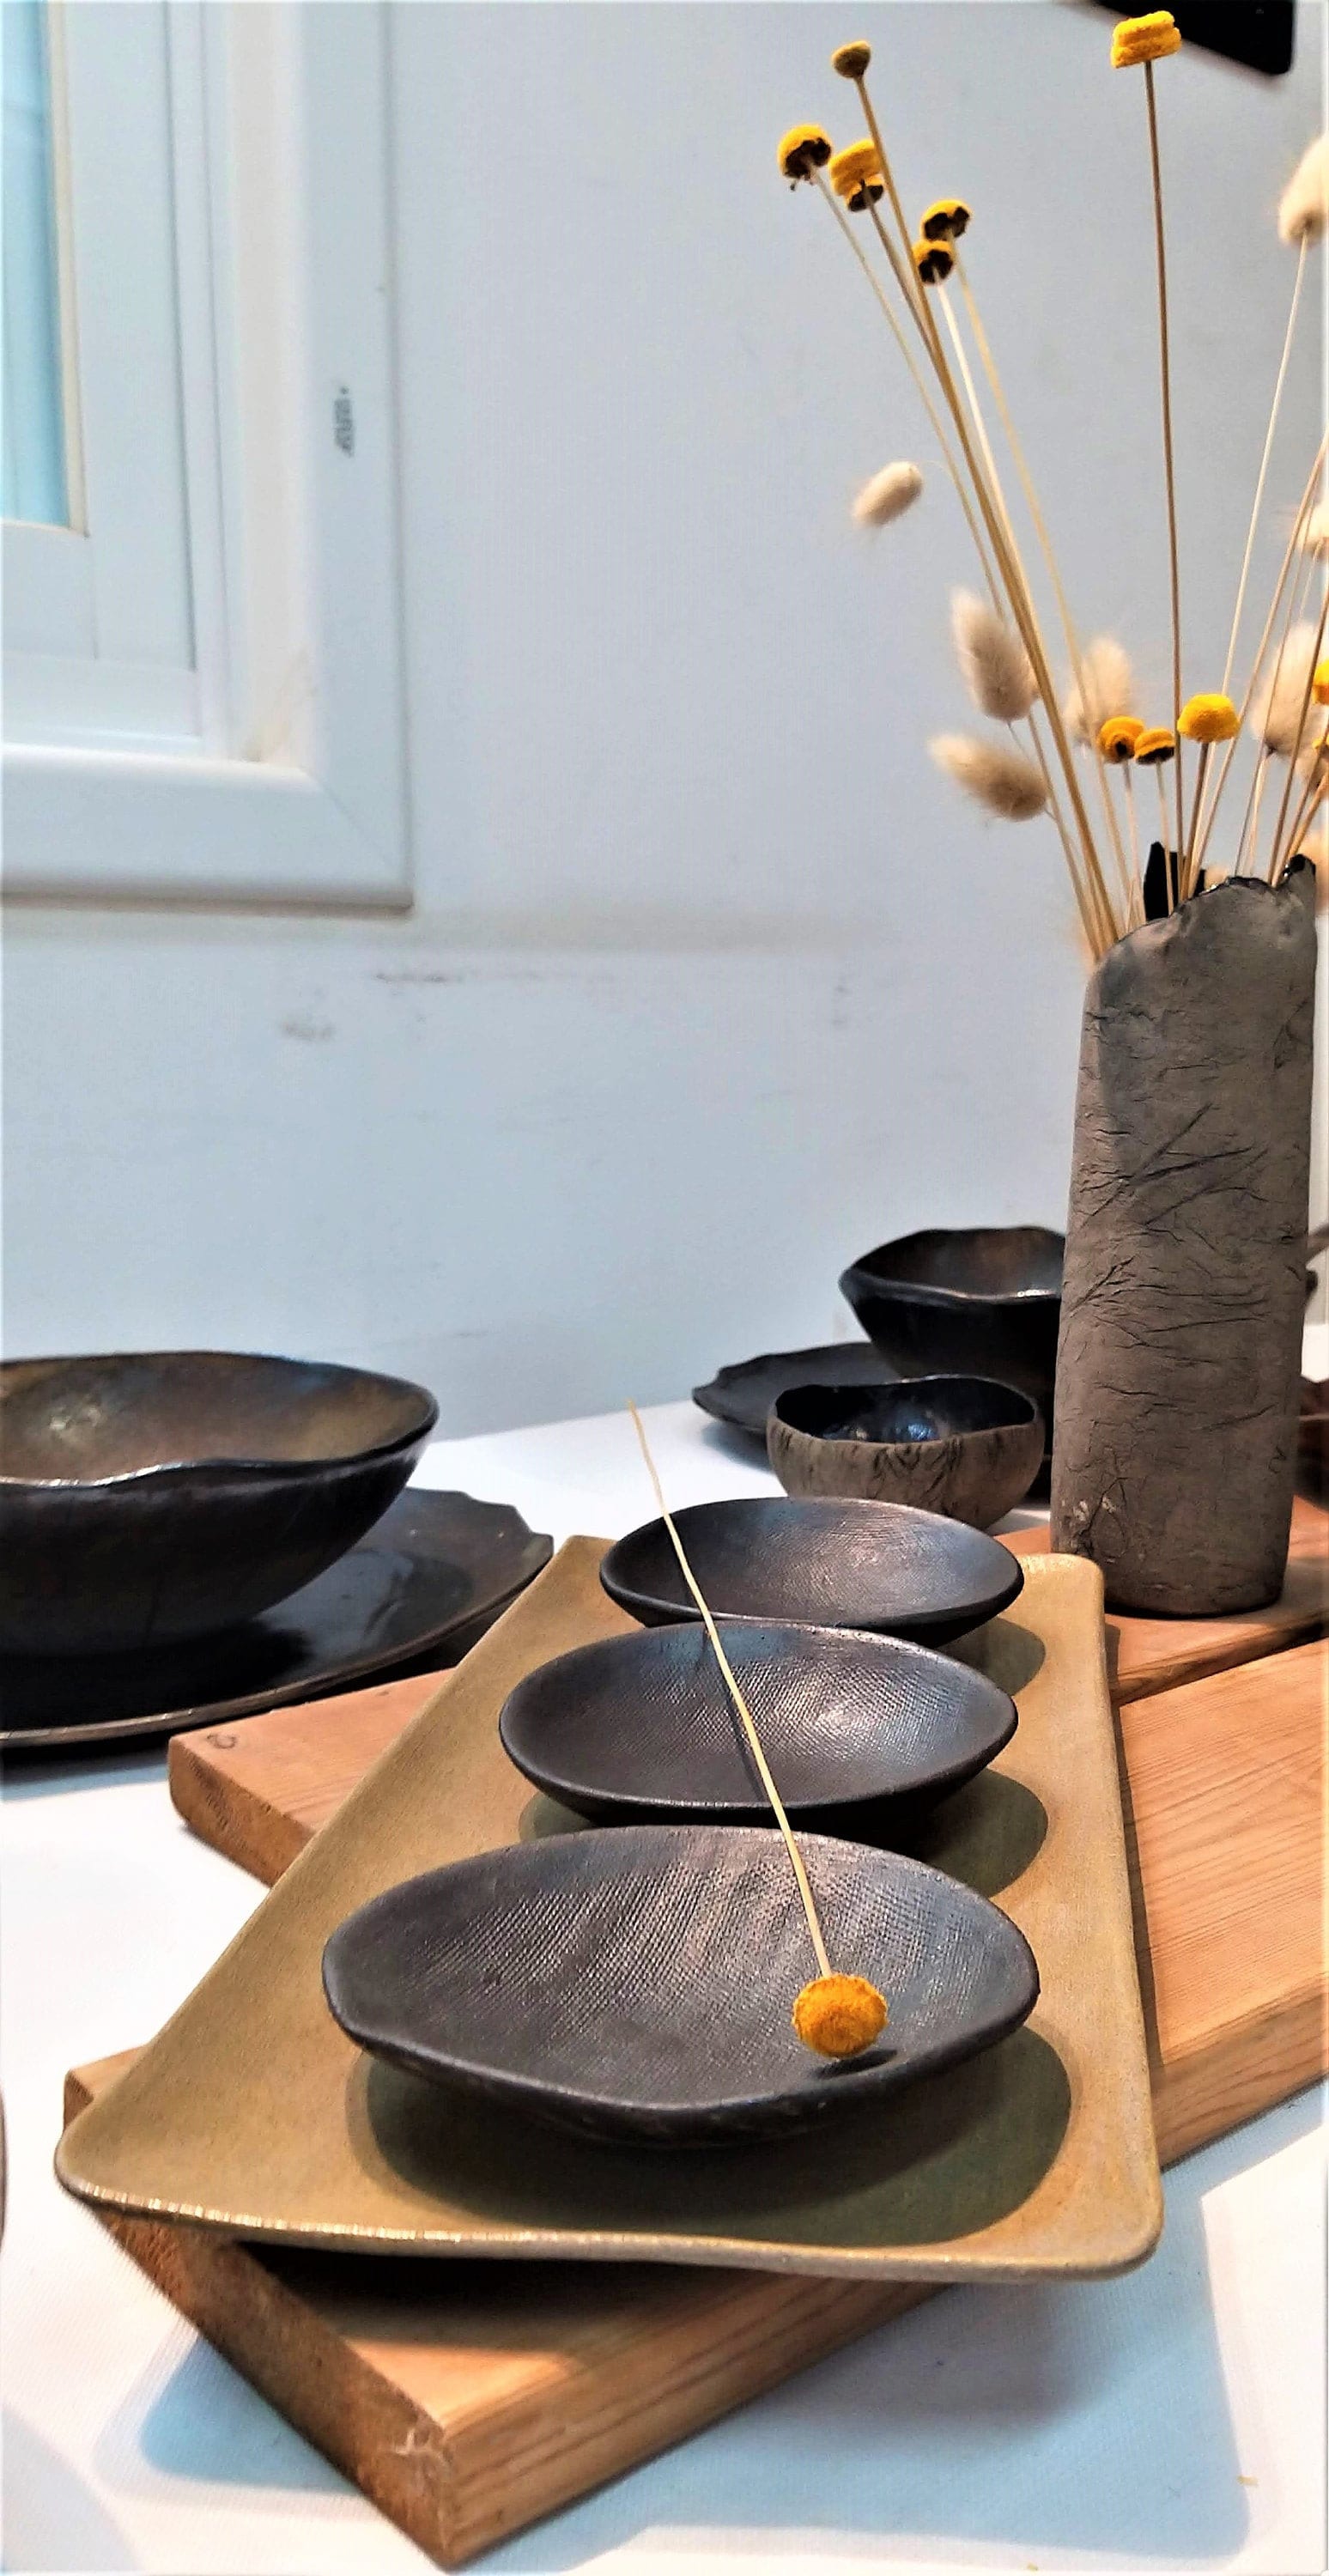 A mocha brown rectangular ceramic tray on which are placed three black ceramic bowls next to a vase and two black ceramic plates on each of which is placed a black ceramic soup bowl